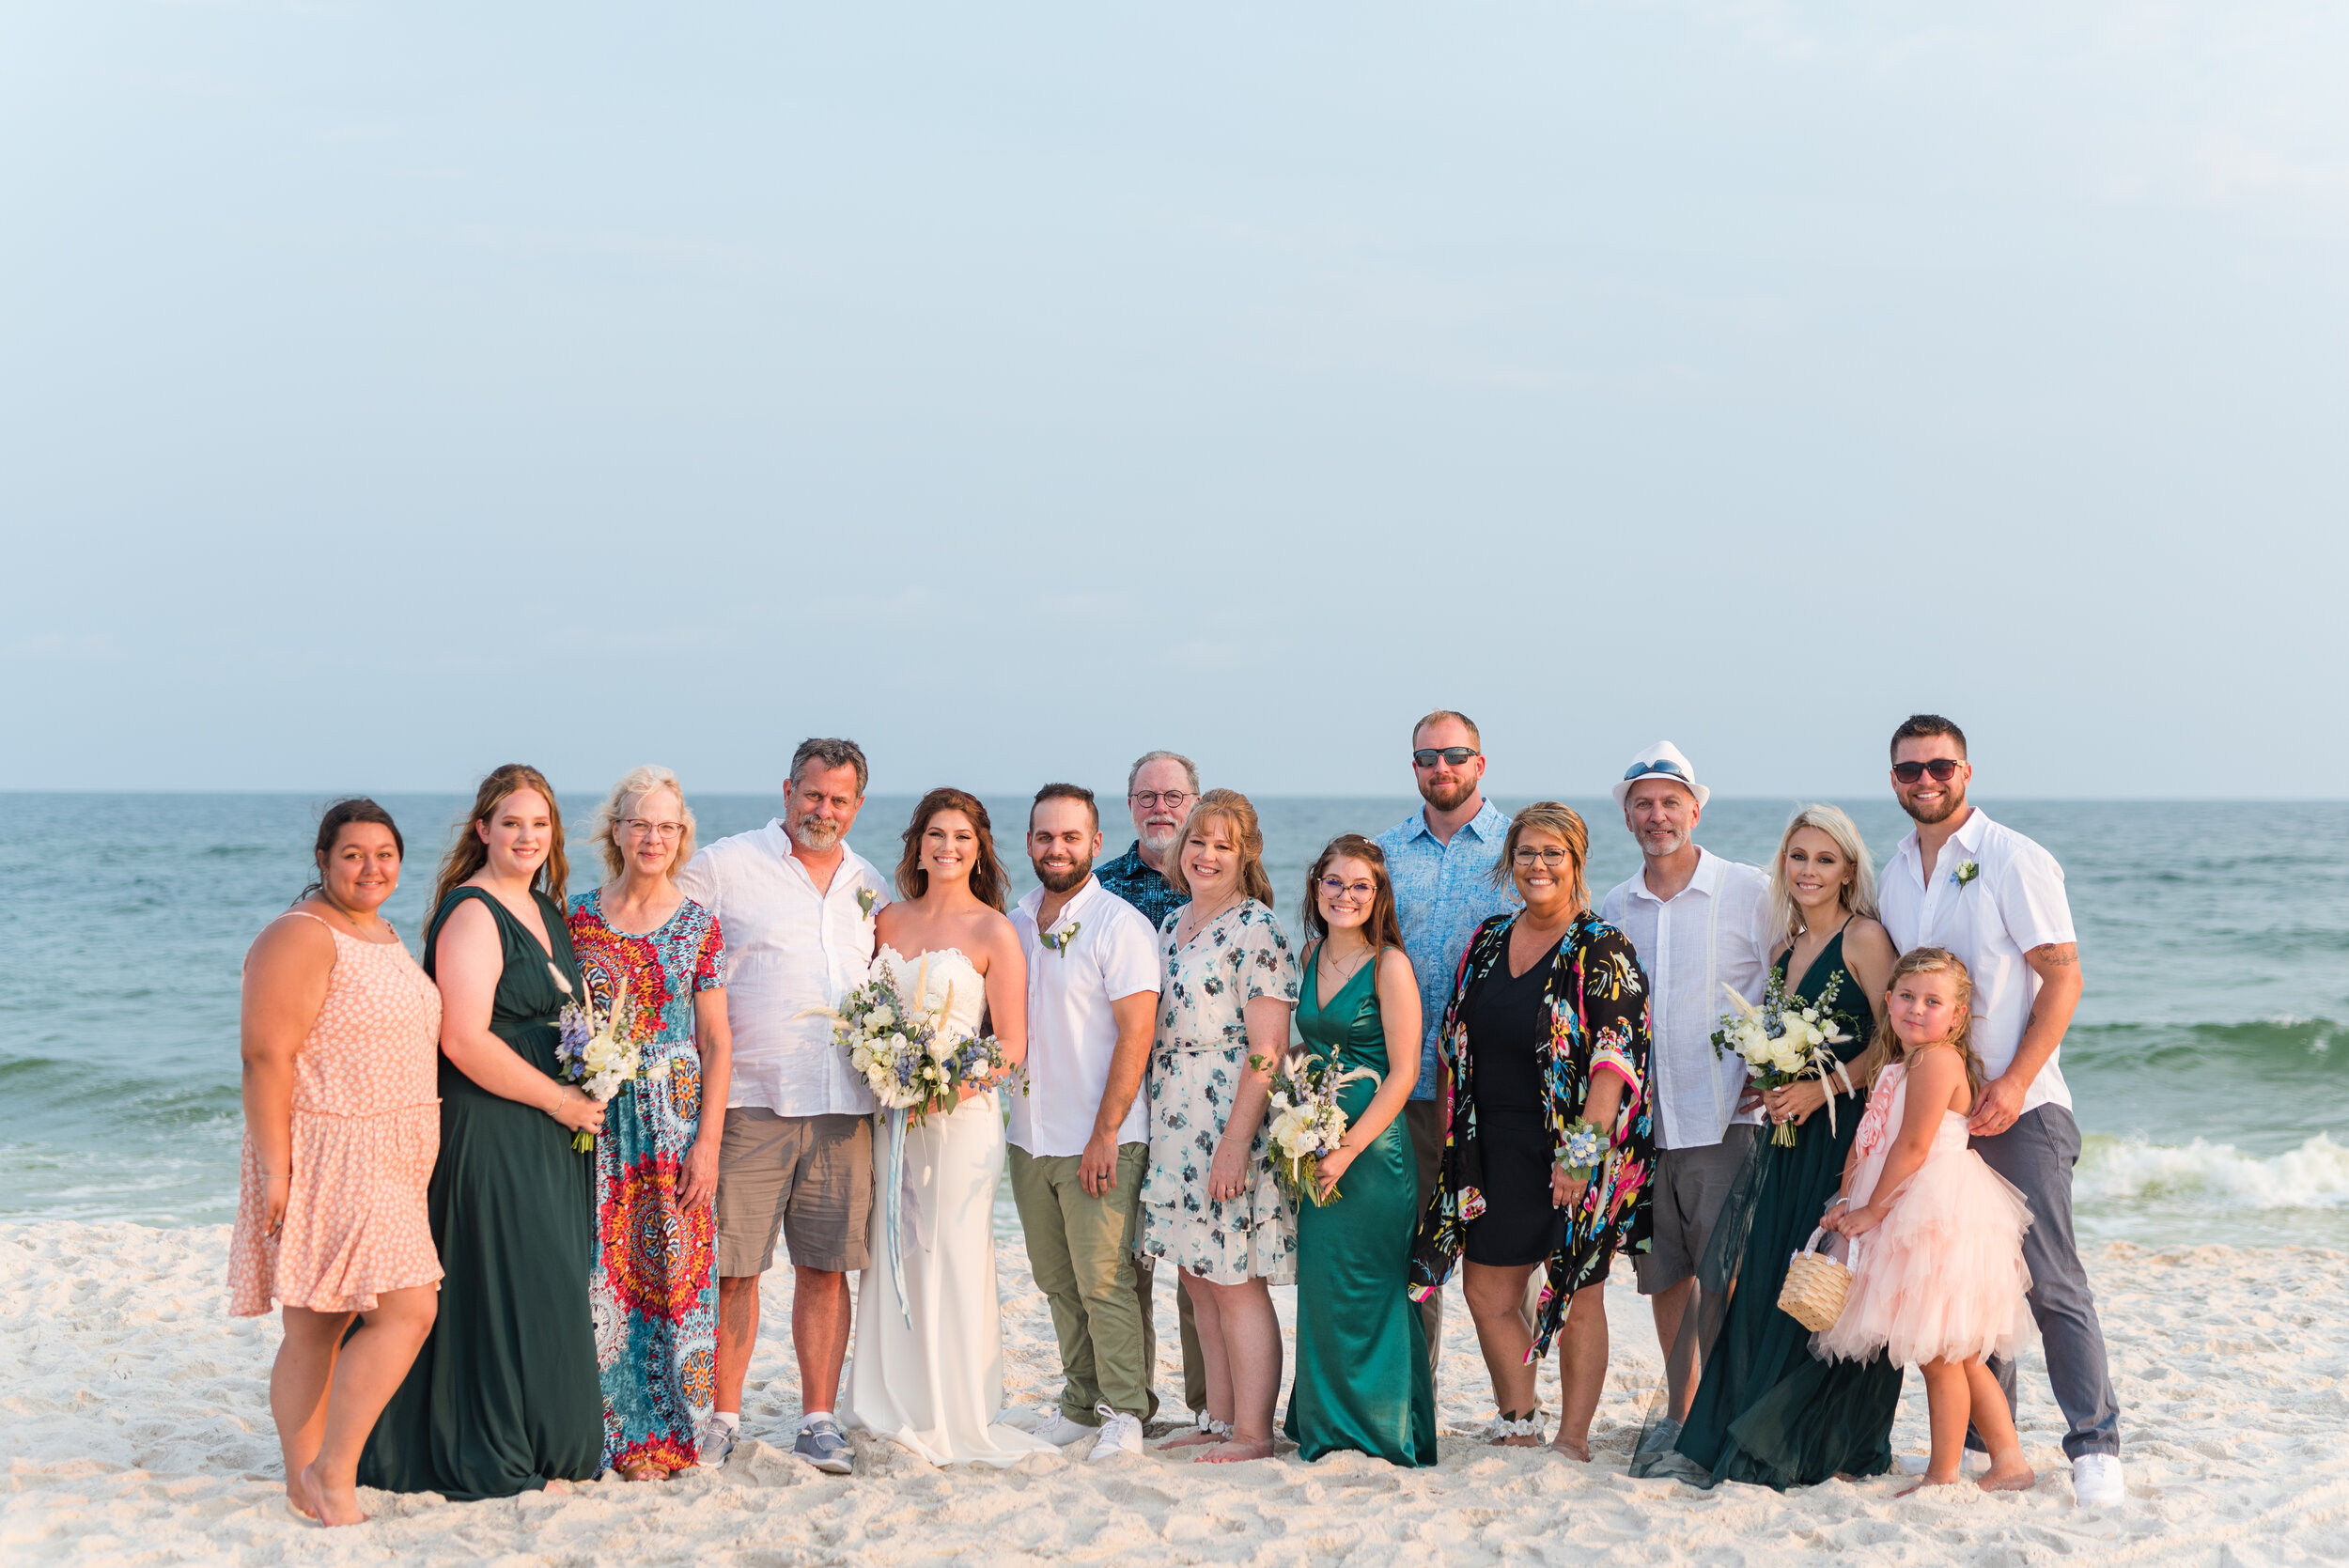 July Orange Beach Wedding Family Formals Photographed by Kristen Marcus Photography